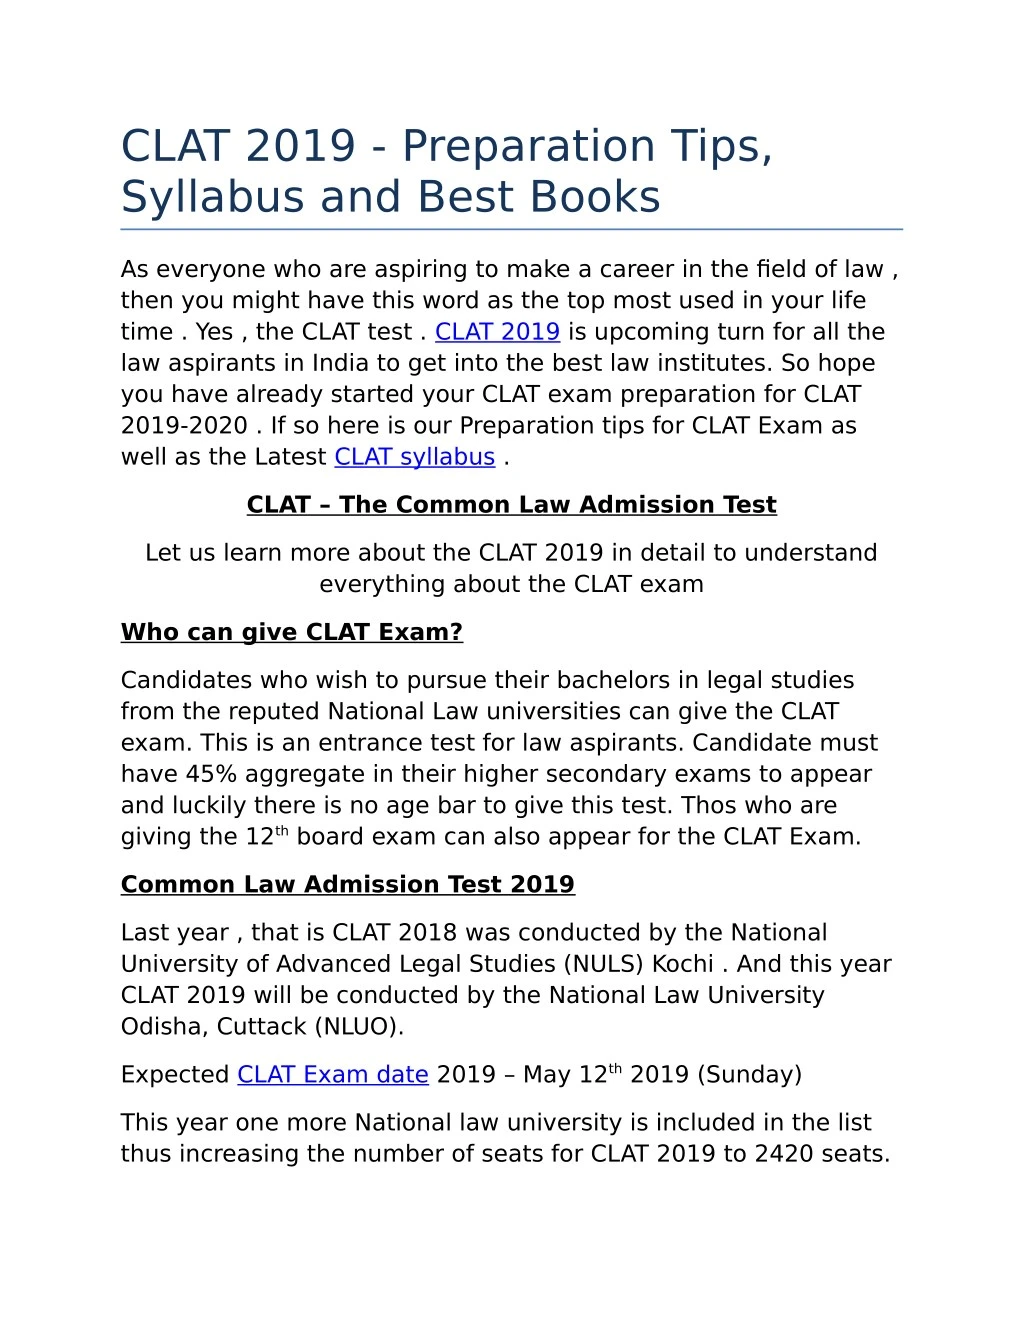 clat 2019 preparation tips syllabus and best books